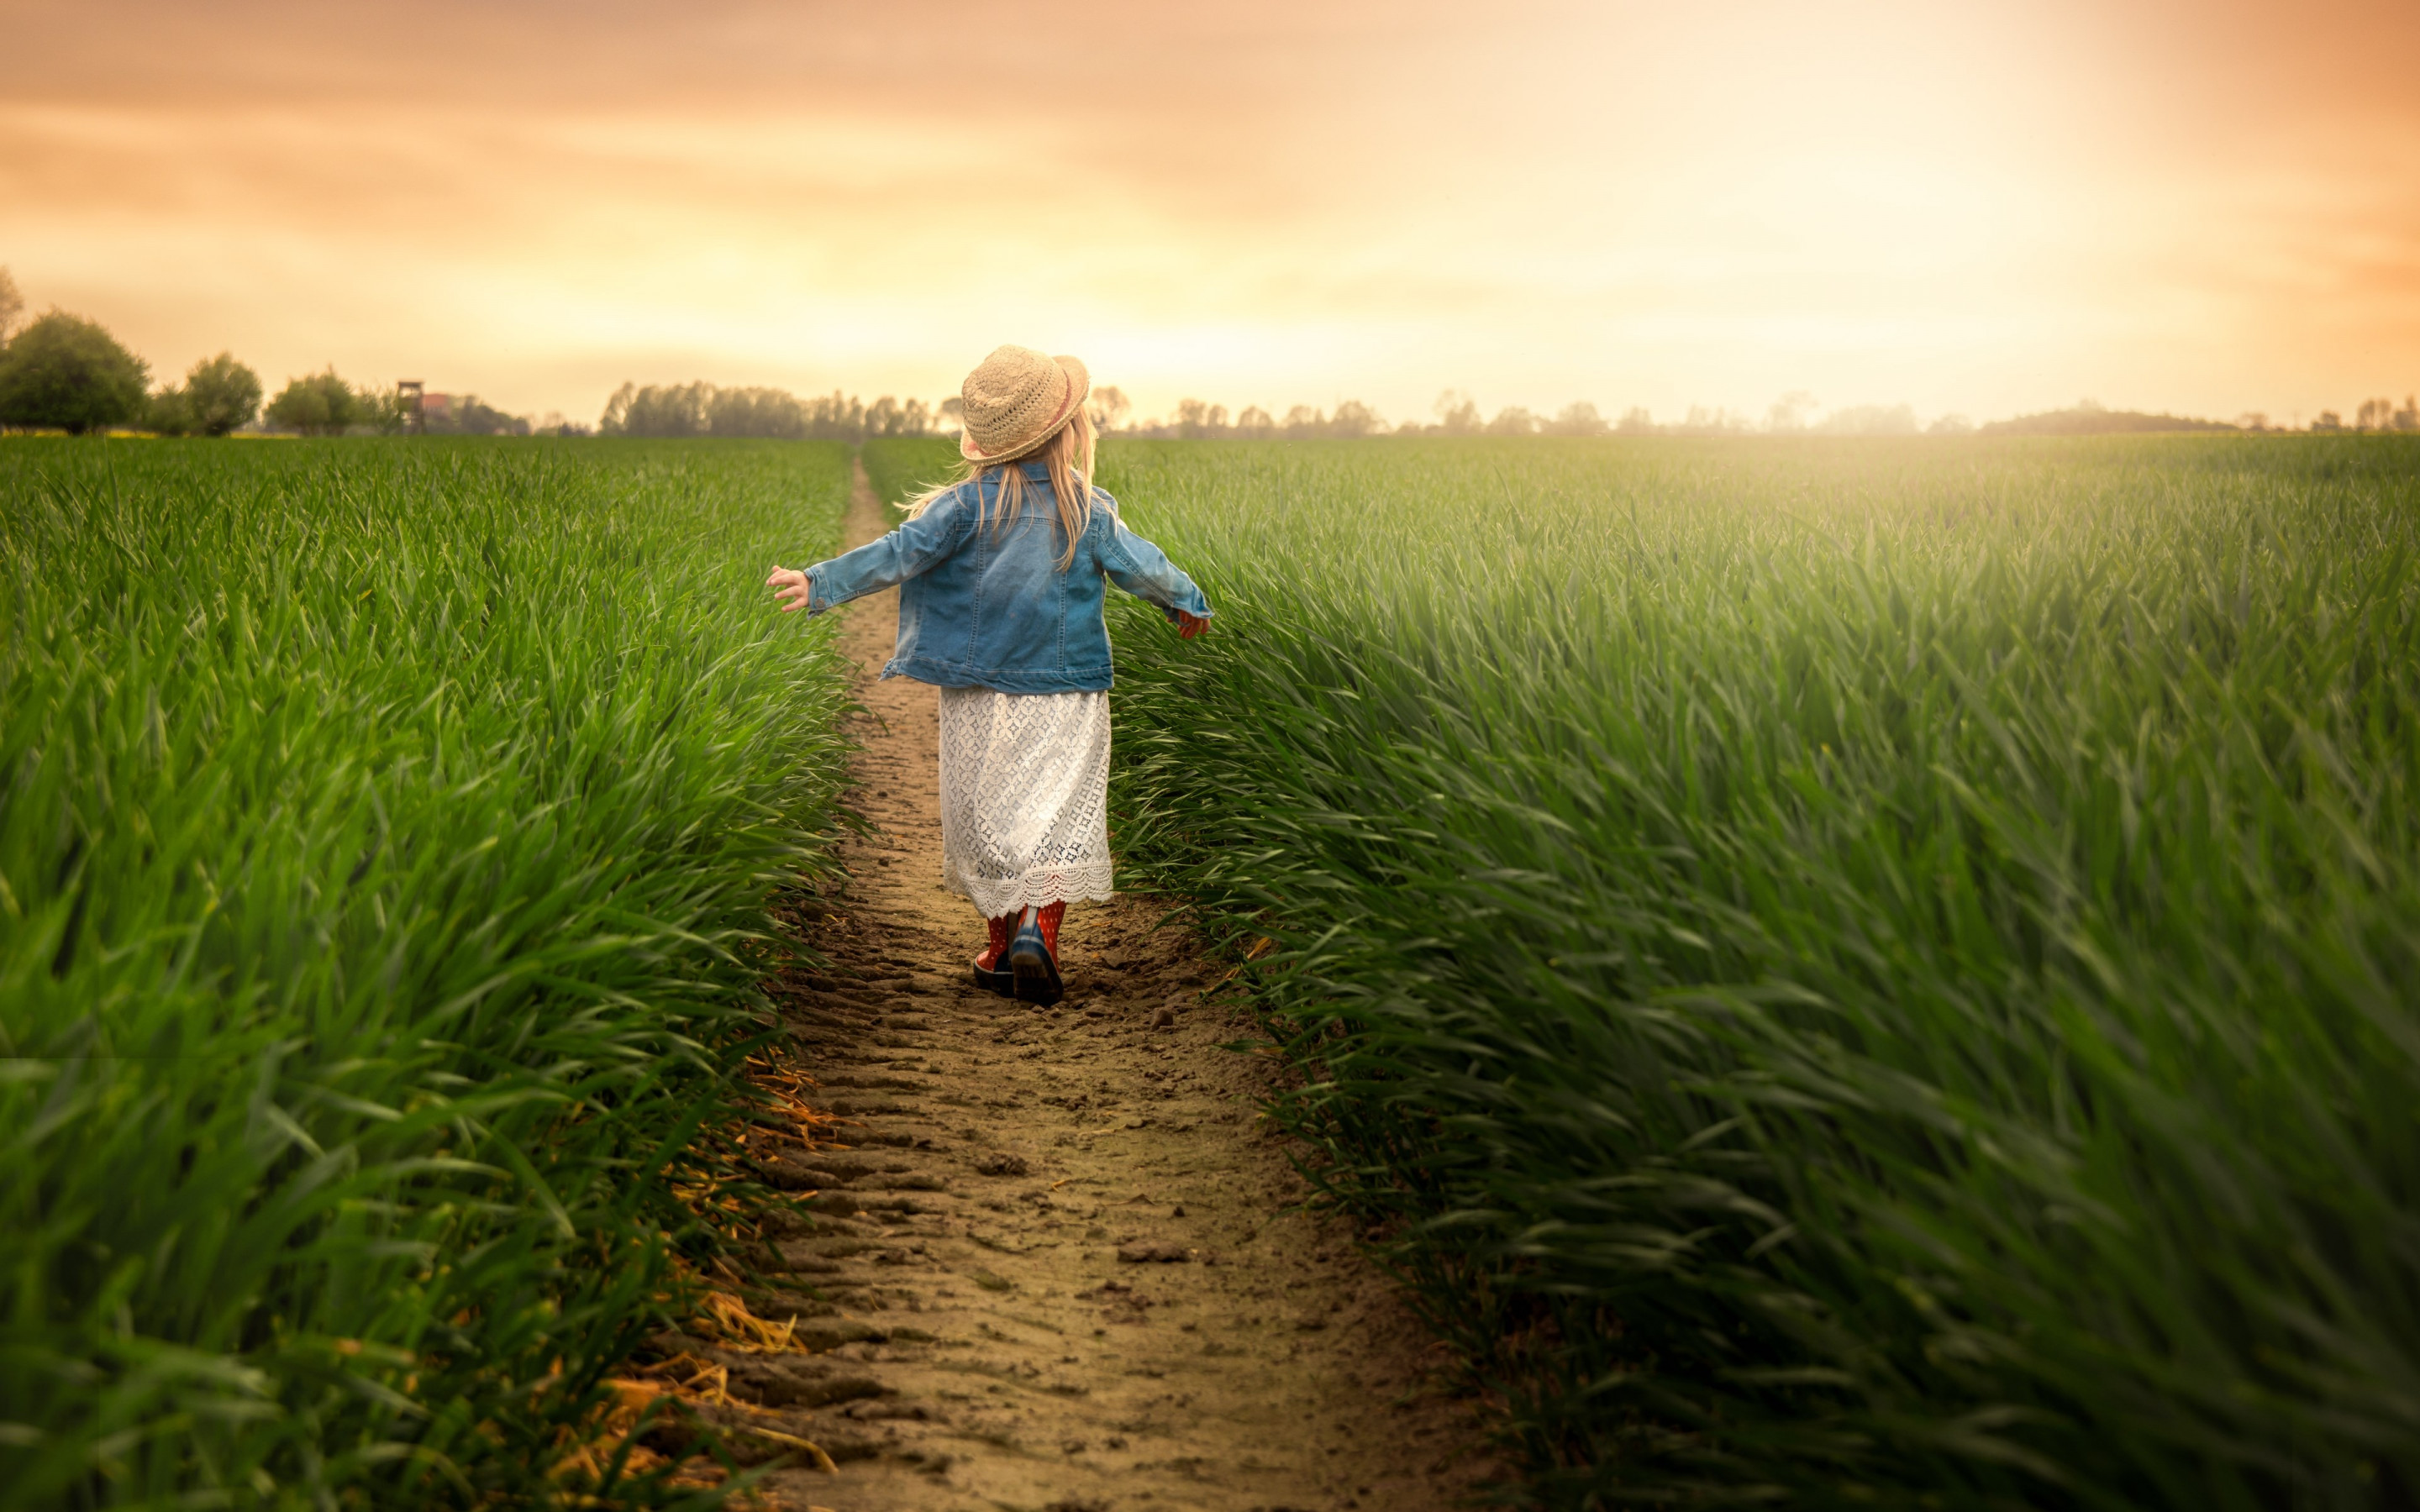 Child in the green field at sunset wallpaper 2880x1800